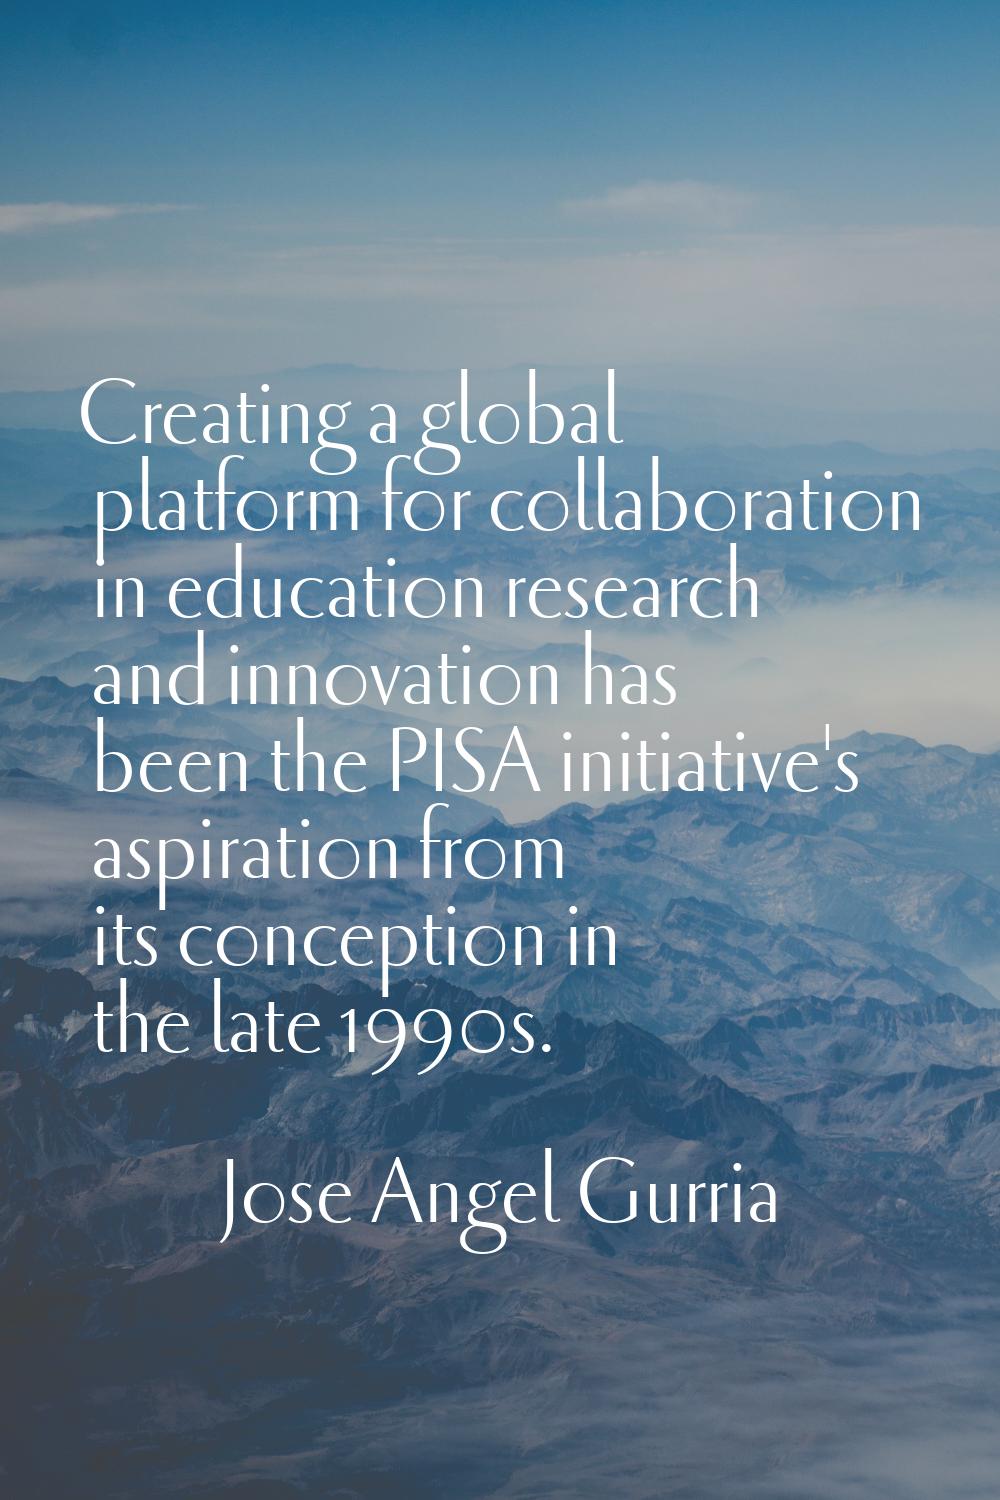 Creating a global platform for collaboration in education research and innovation has been the PISA